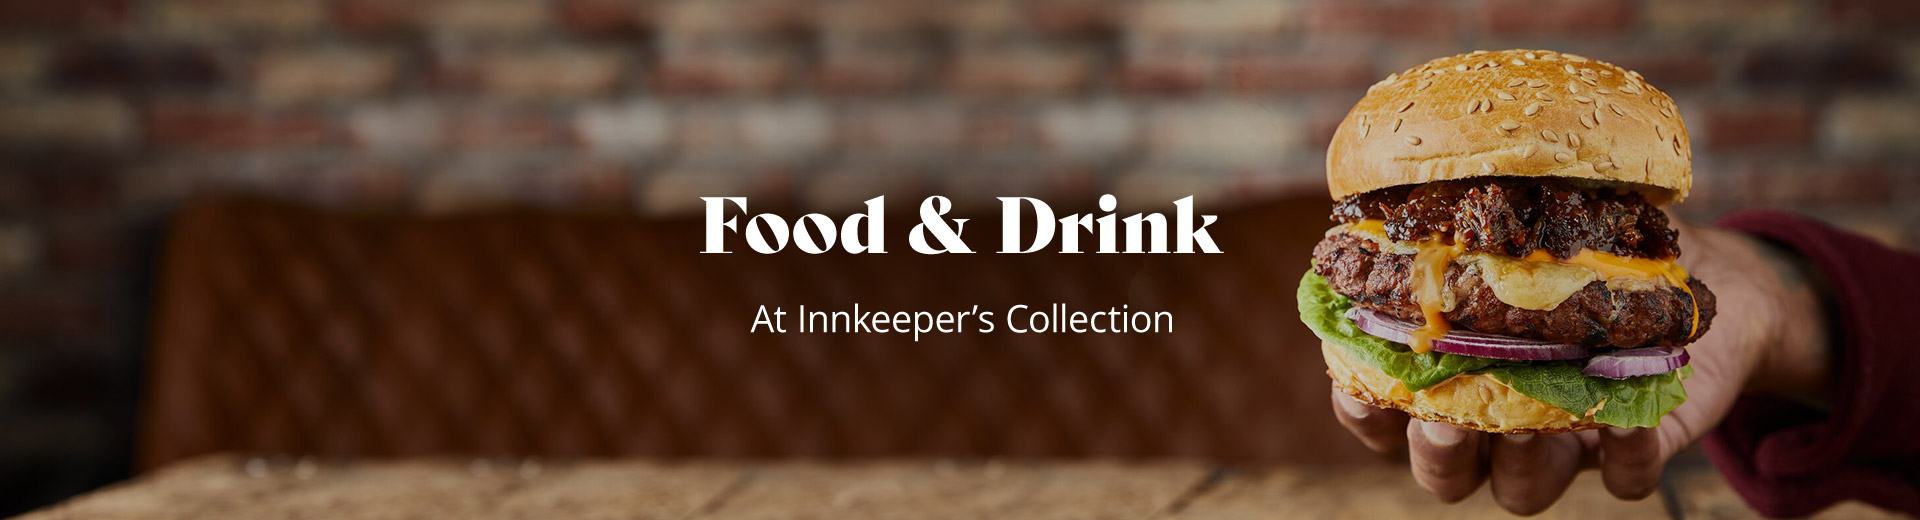 Food & drink at Innkeeper’s Collection